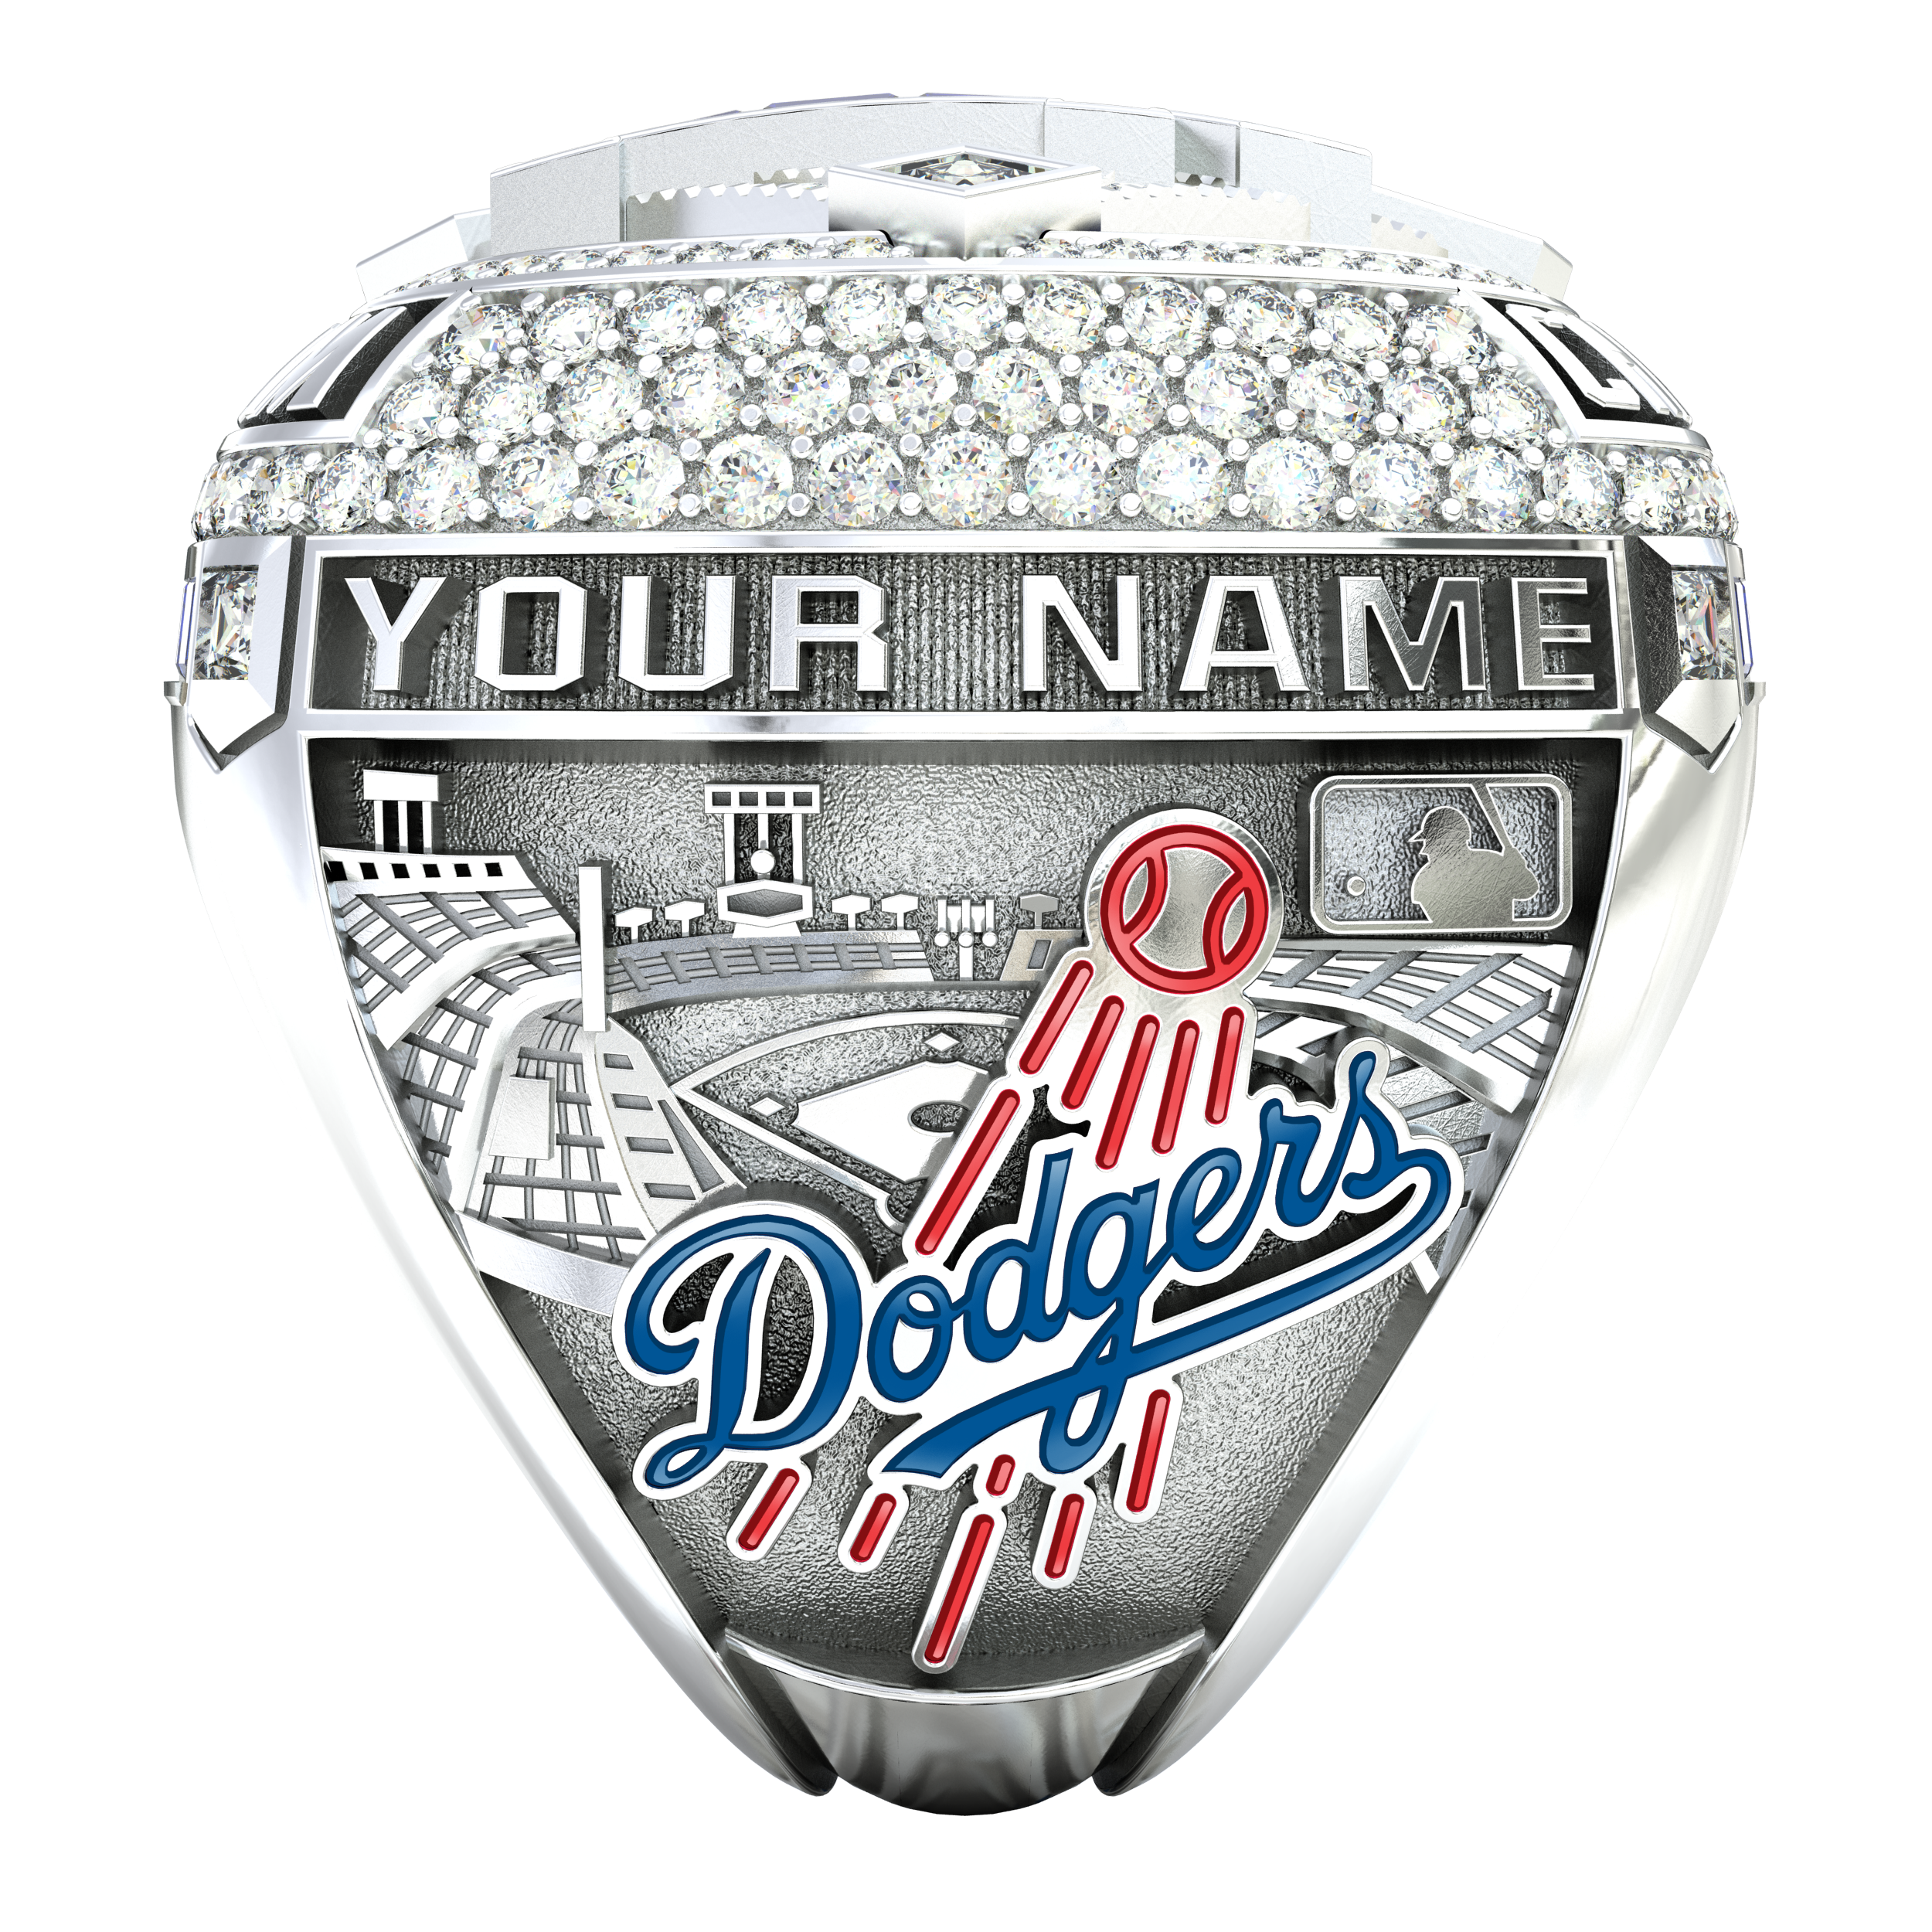 LADF launches 2020 World Series championship ring sweepstakes